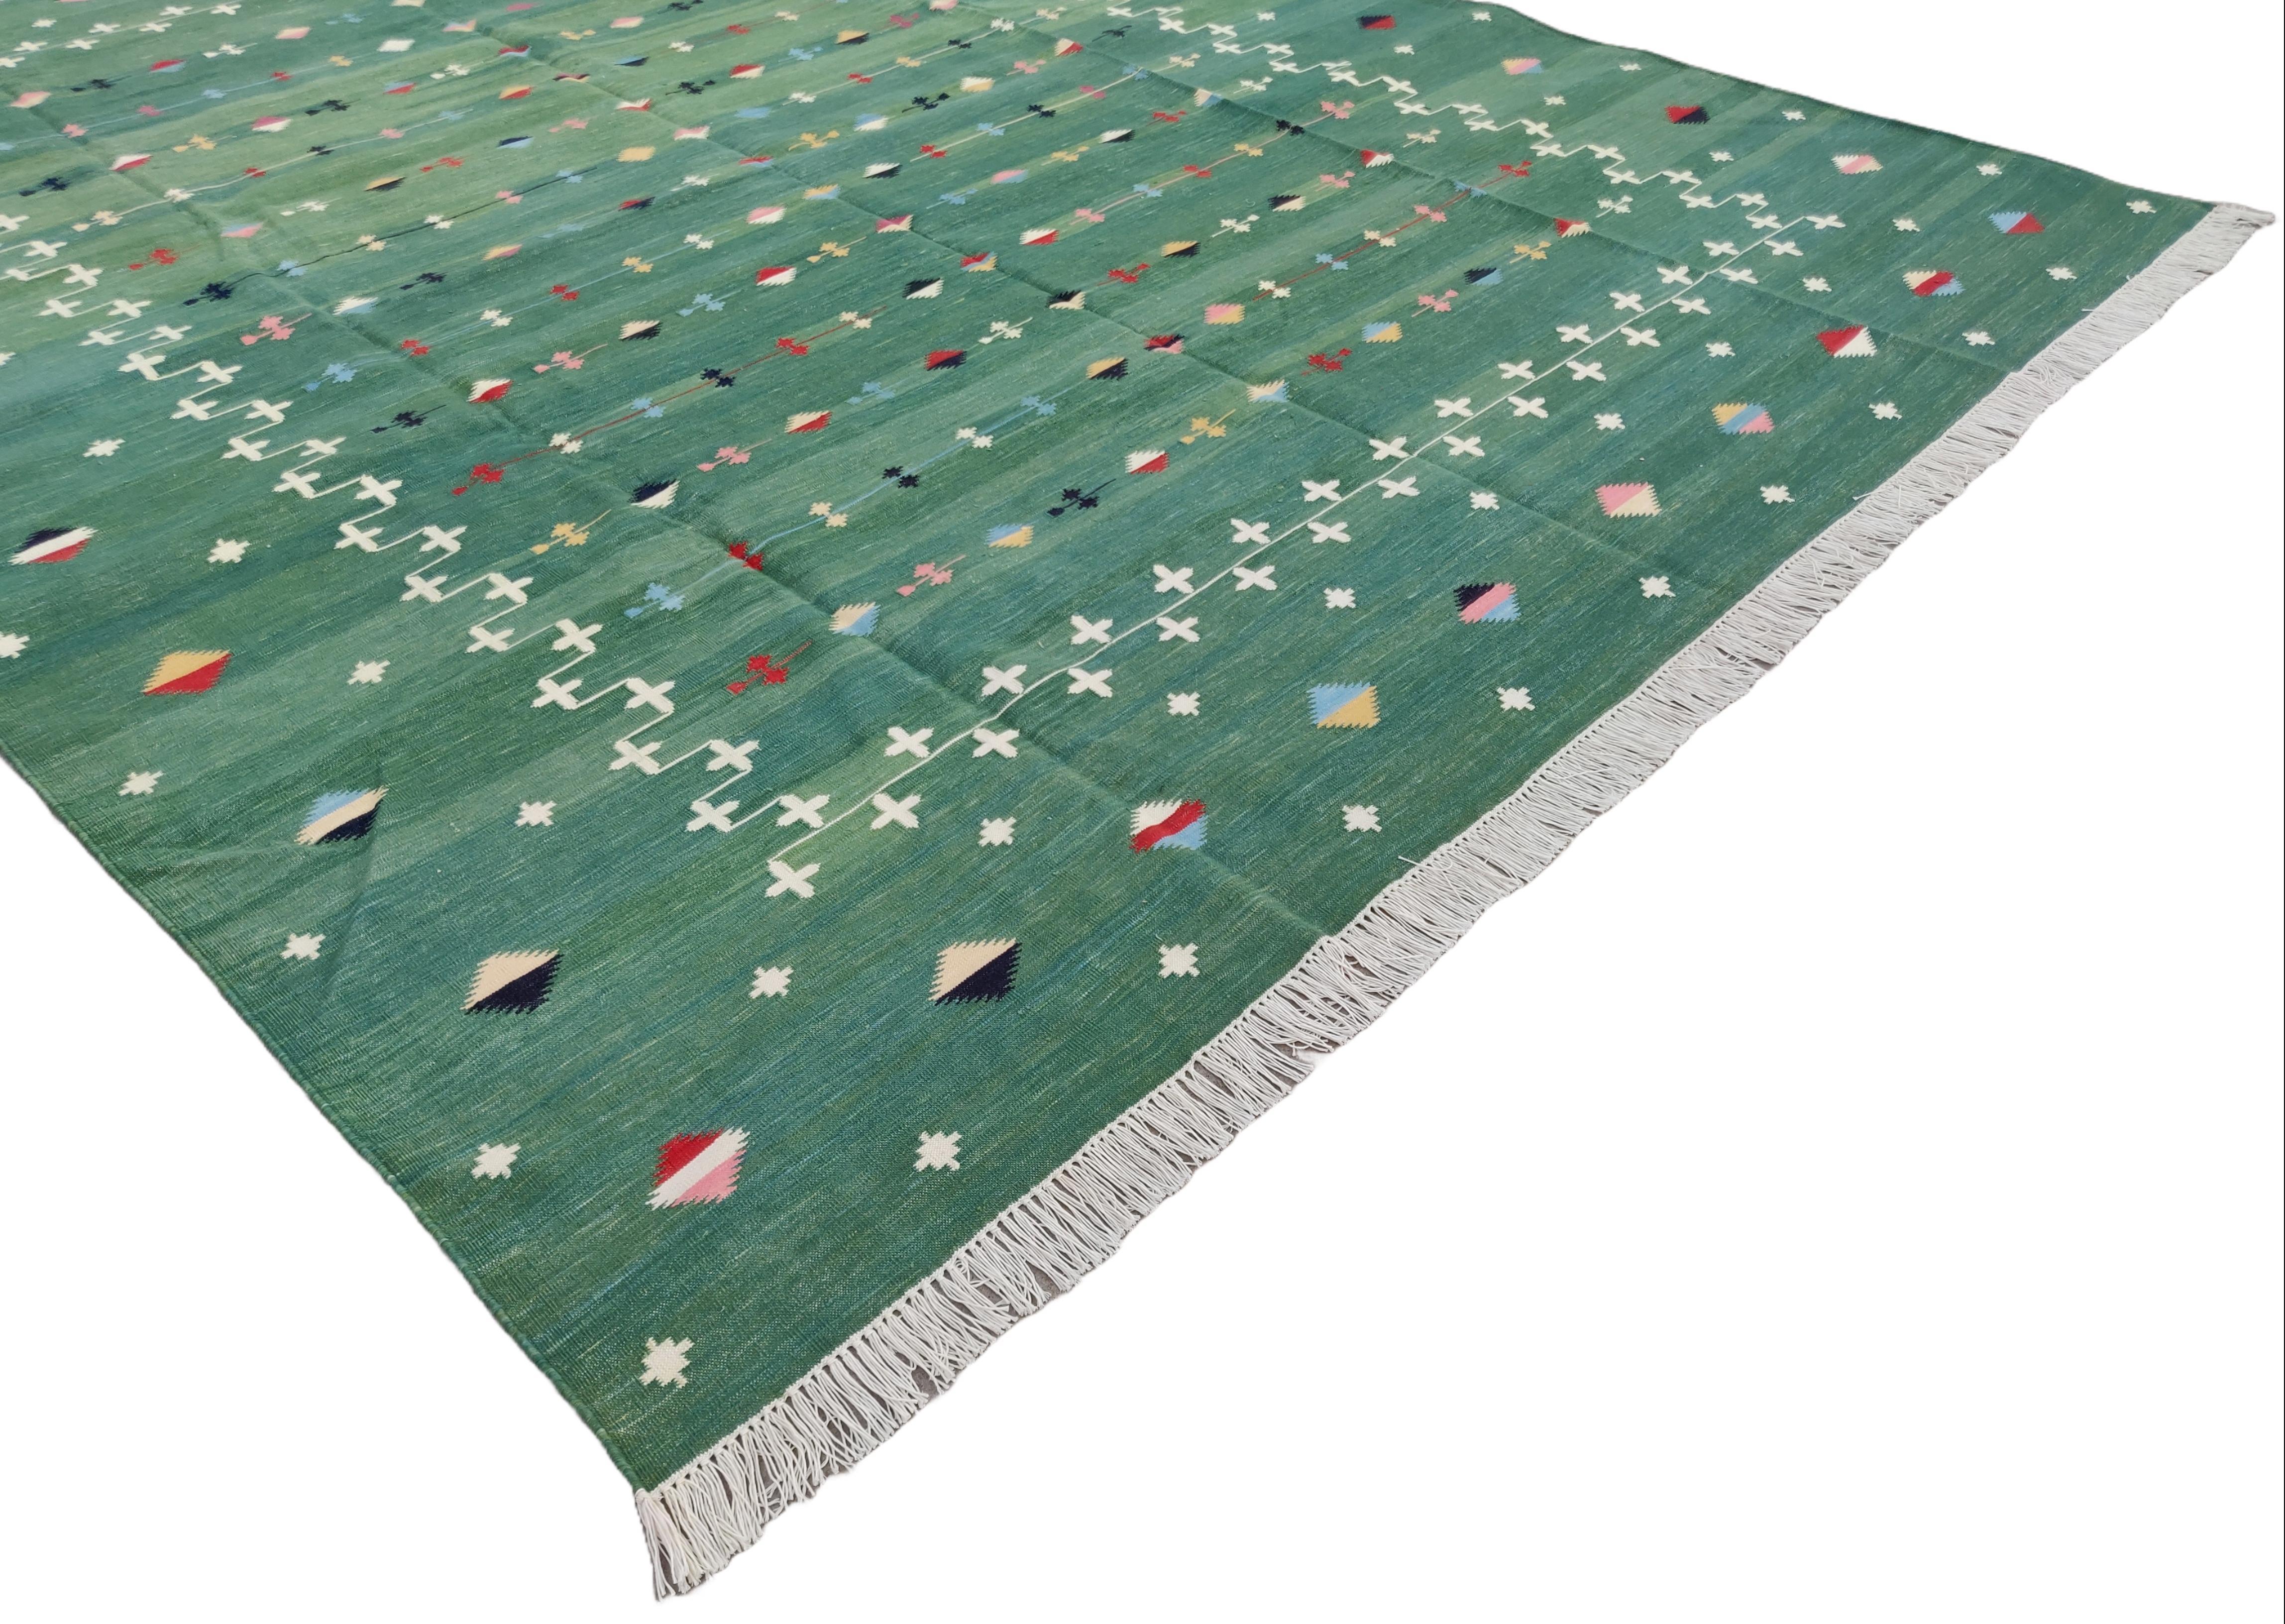 Cotton Vegetable Dyed Forest Green Shooting Star Rug-8'x10'
These special flat-weave dhurries are hand-woven with 15 ply 100% cotton yarn. Due to the special manufacturing techniques used to create our rugs, the size and color of each piece may vary